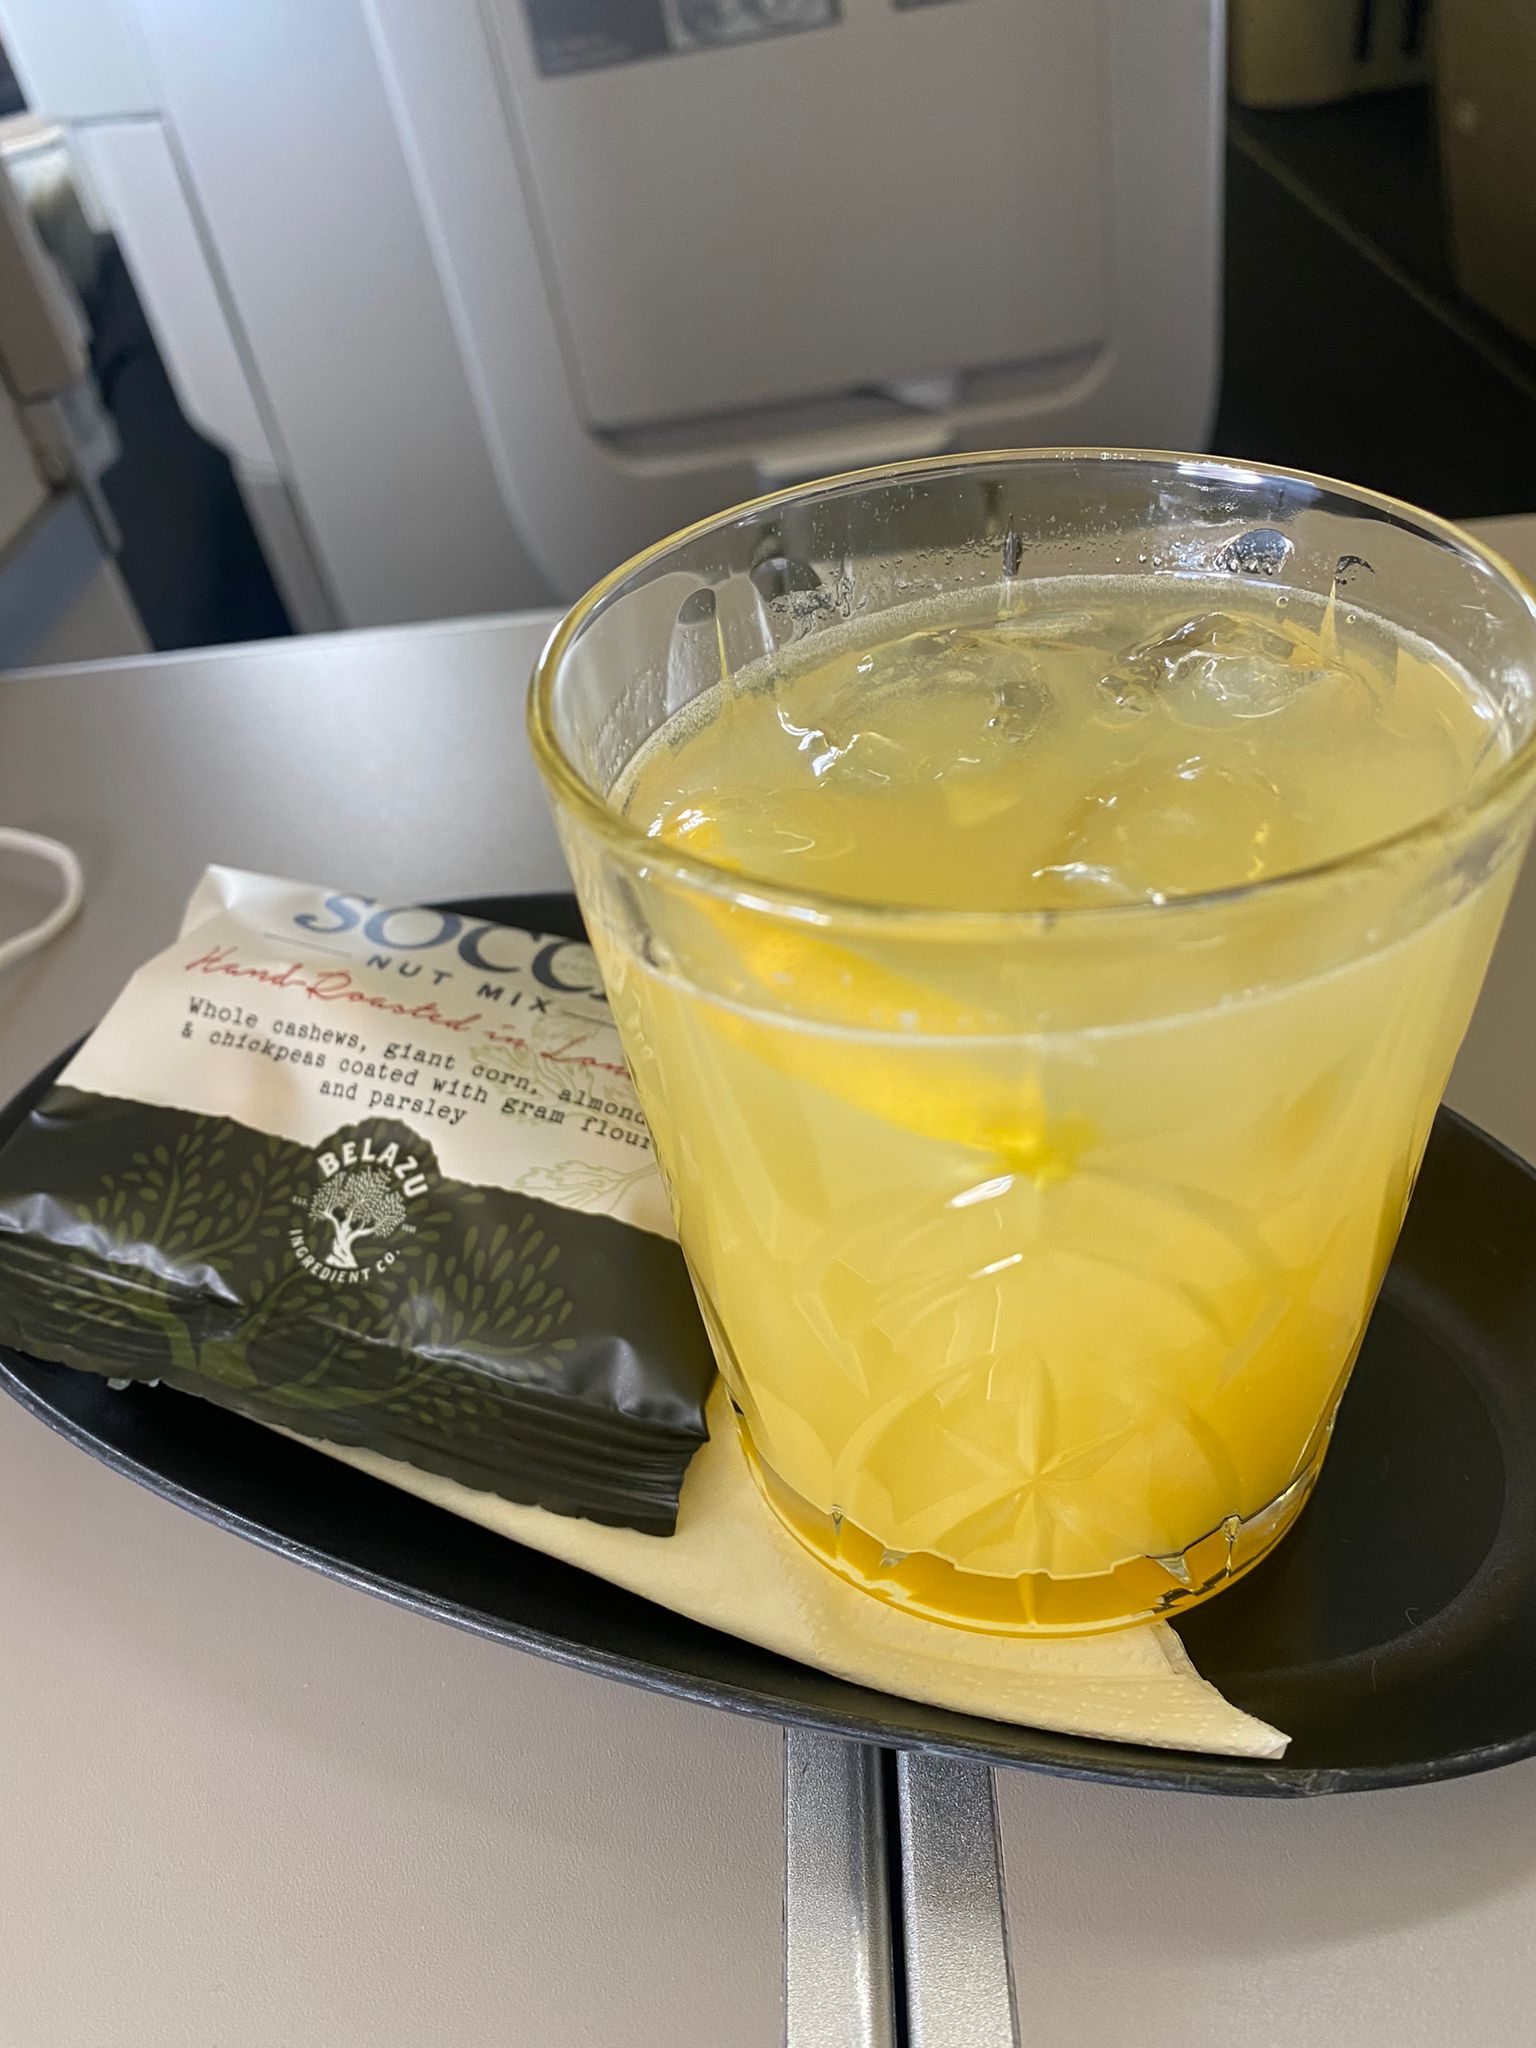 British Airways Club World B777-300ER Heathrow to Los Angeles review &#8211; Turning left for less WhatsApp Image 2021 12 30 at 17